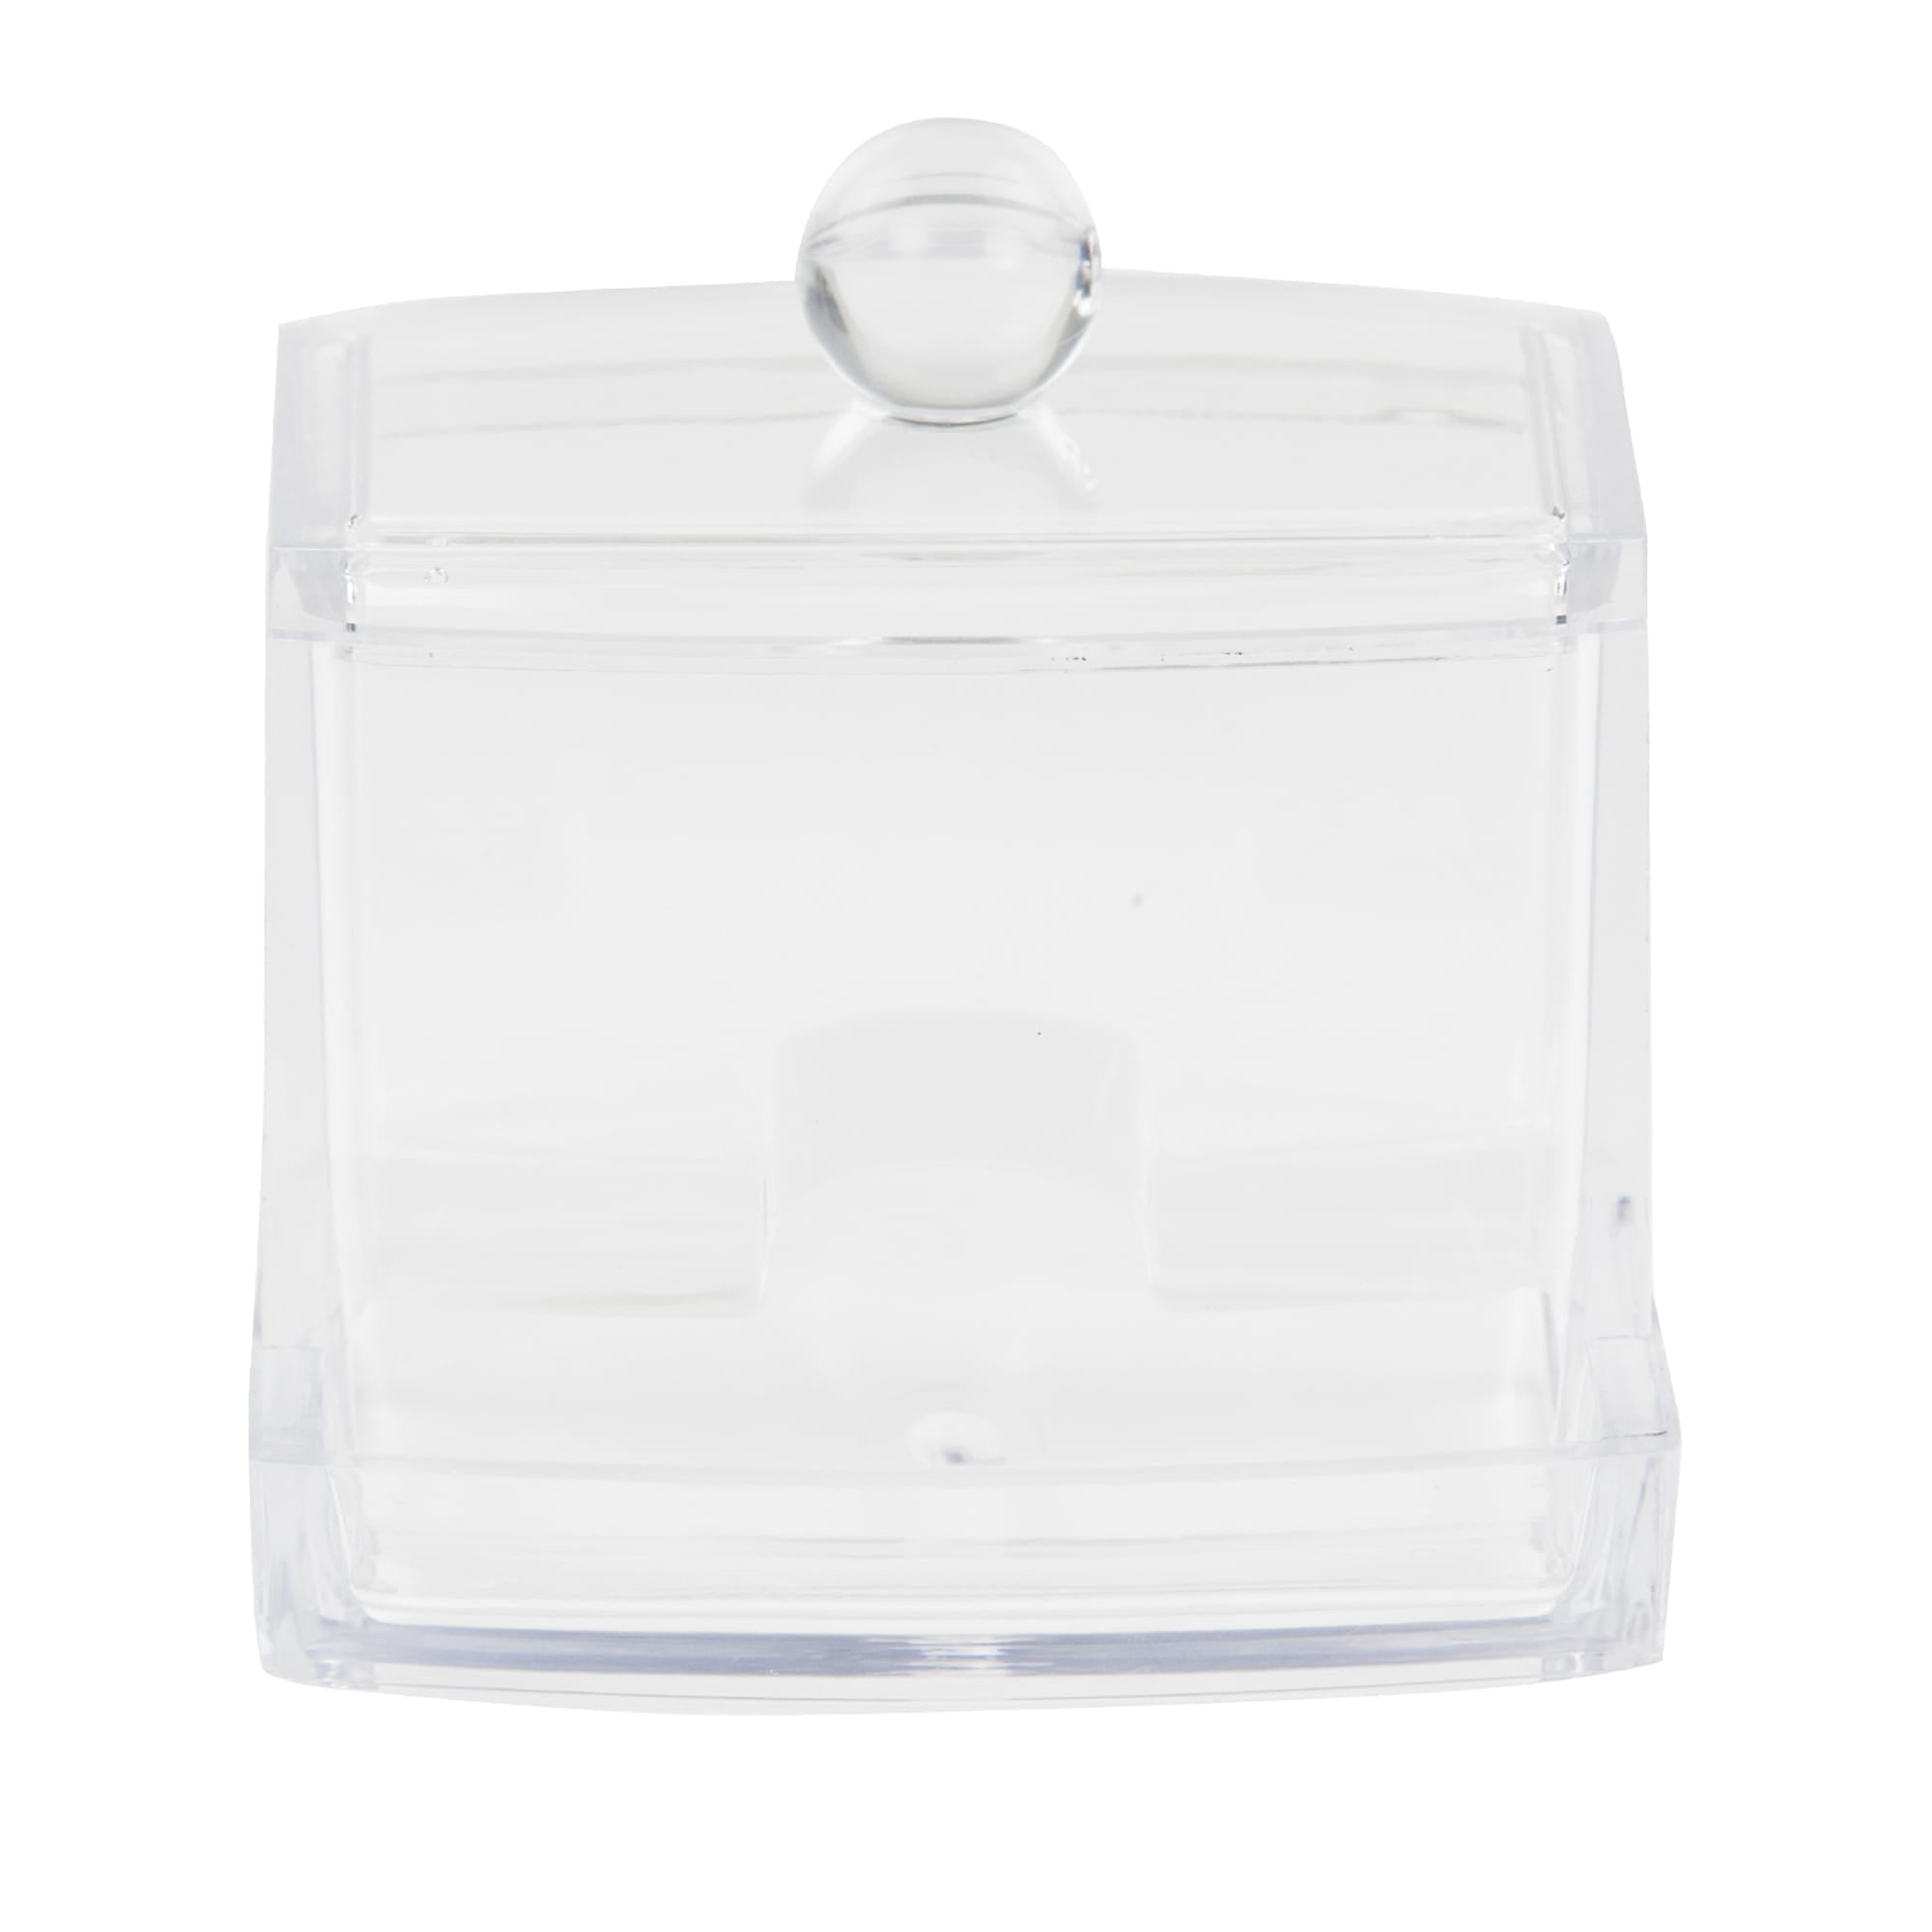 Home Basics Cotton Swab Holder with Lid, Clear $2.00 EACH, CASE PACK OF 12